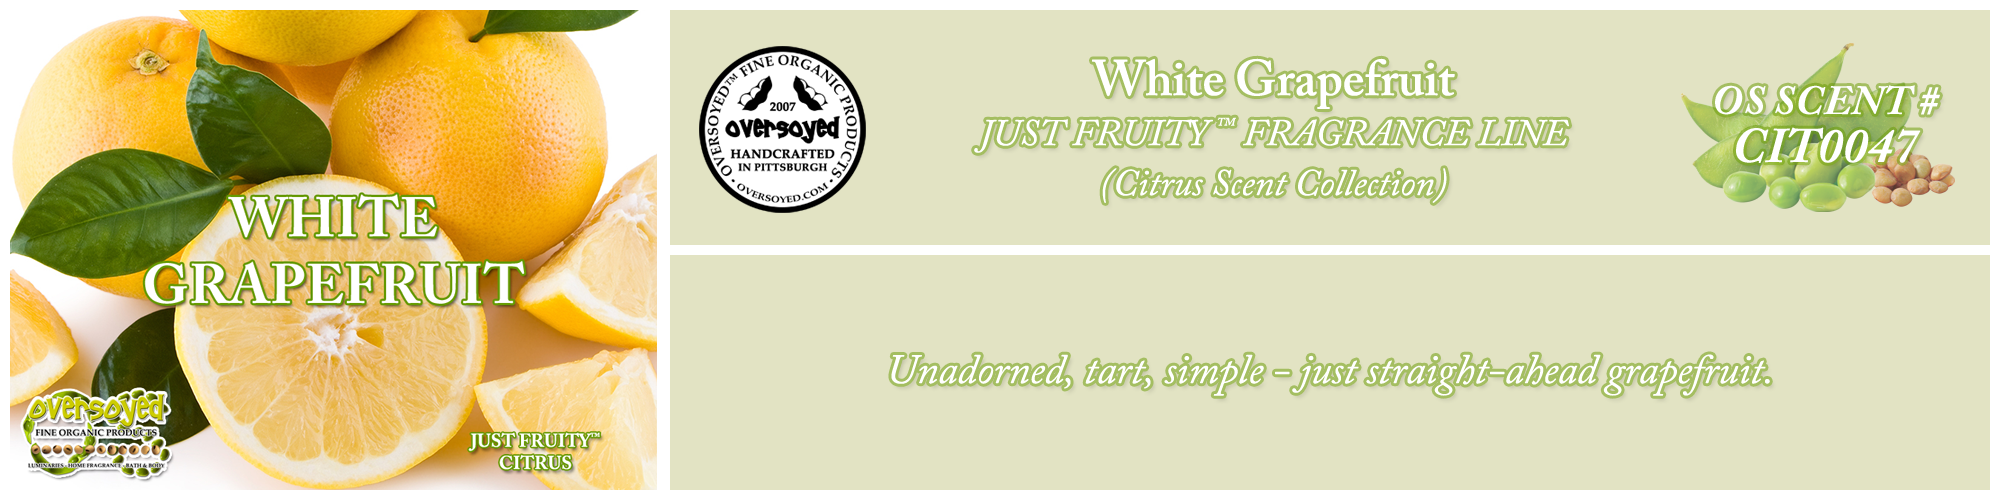 White Grapefruit Handcrafted Products Collection